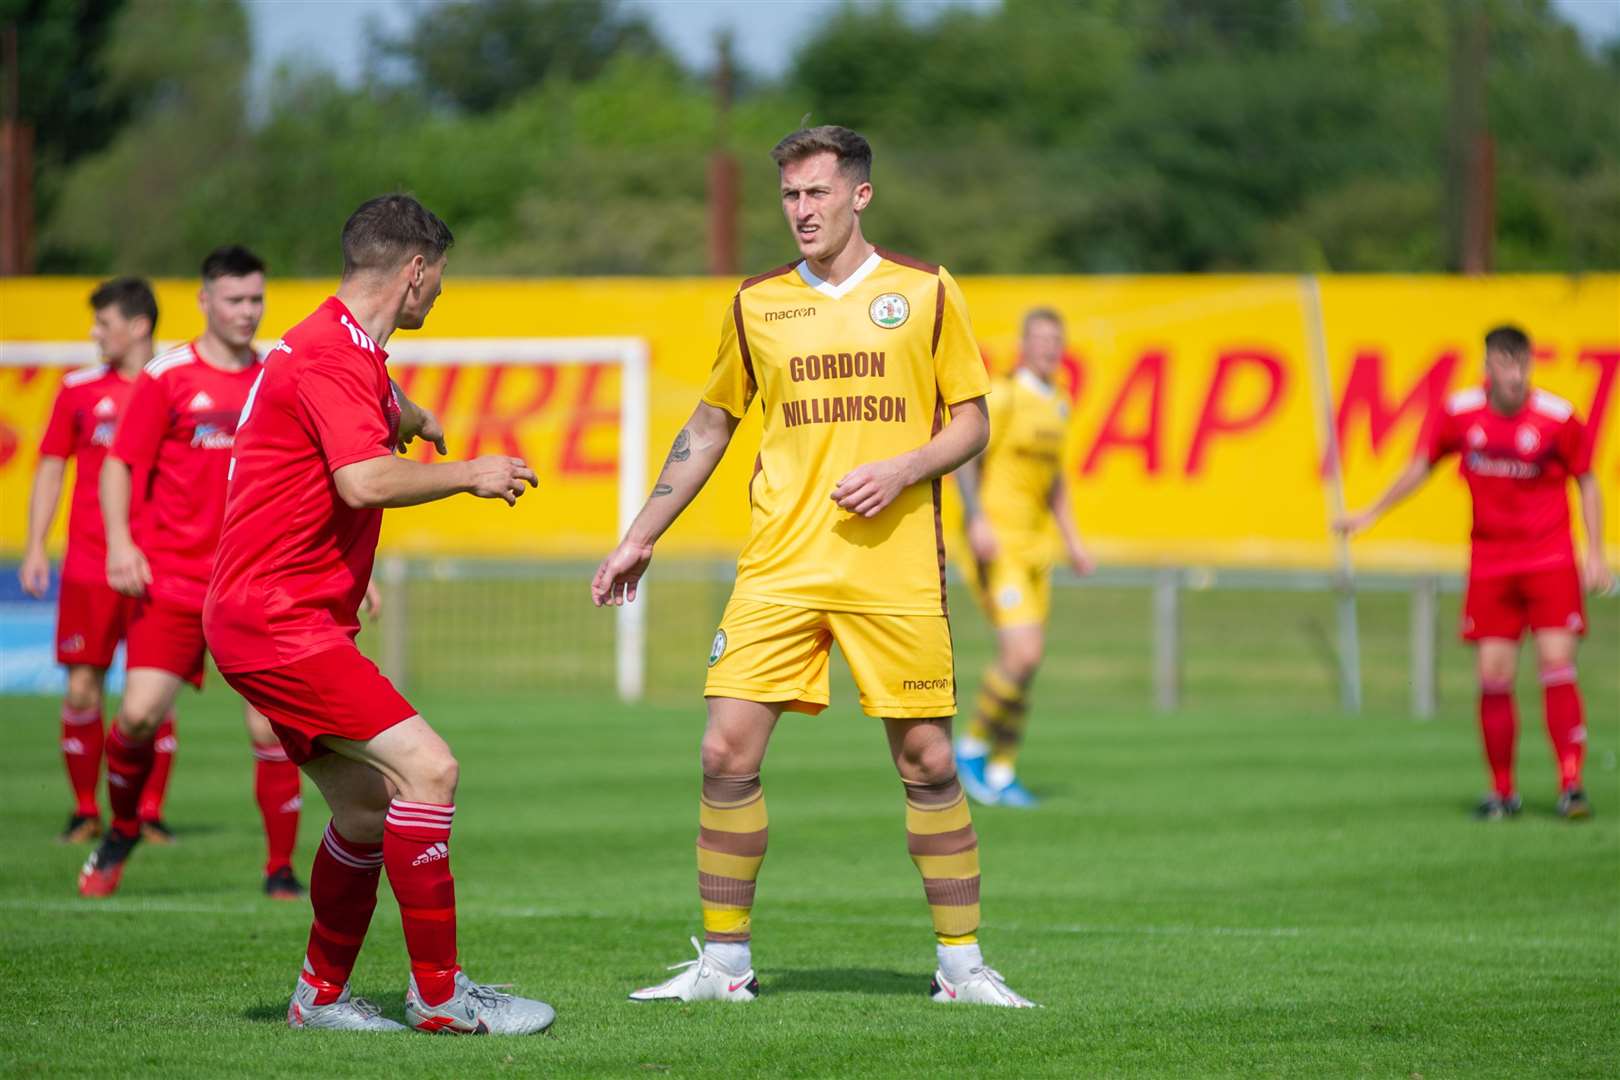 Forres Mechanics' Dale Wood...Forres Mechanics FC (1) vs Lossiemouth FC (0) - Highland Football League - Mosset Park, Forres 28/08/2021...Picture: Daniel Forsyth..